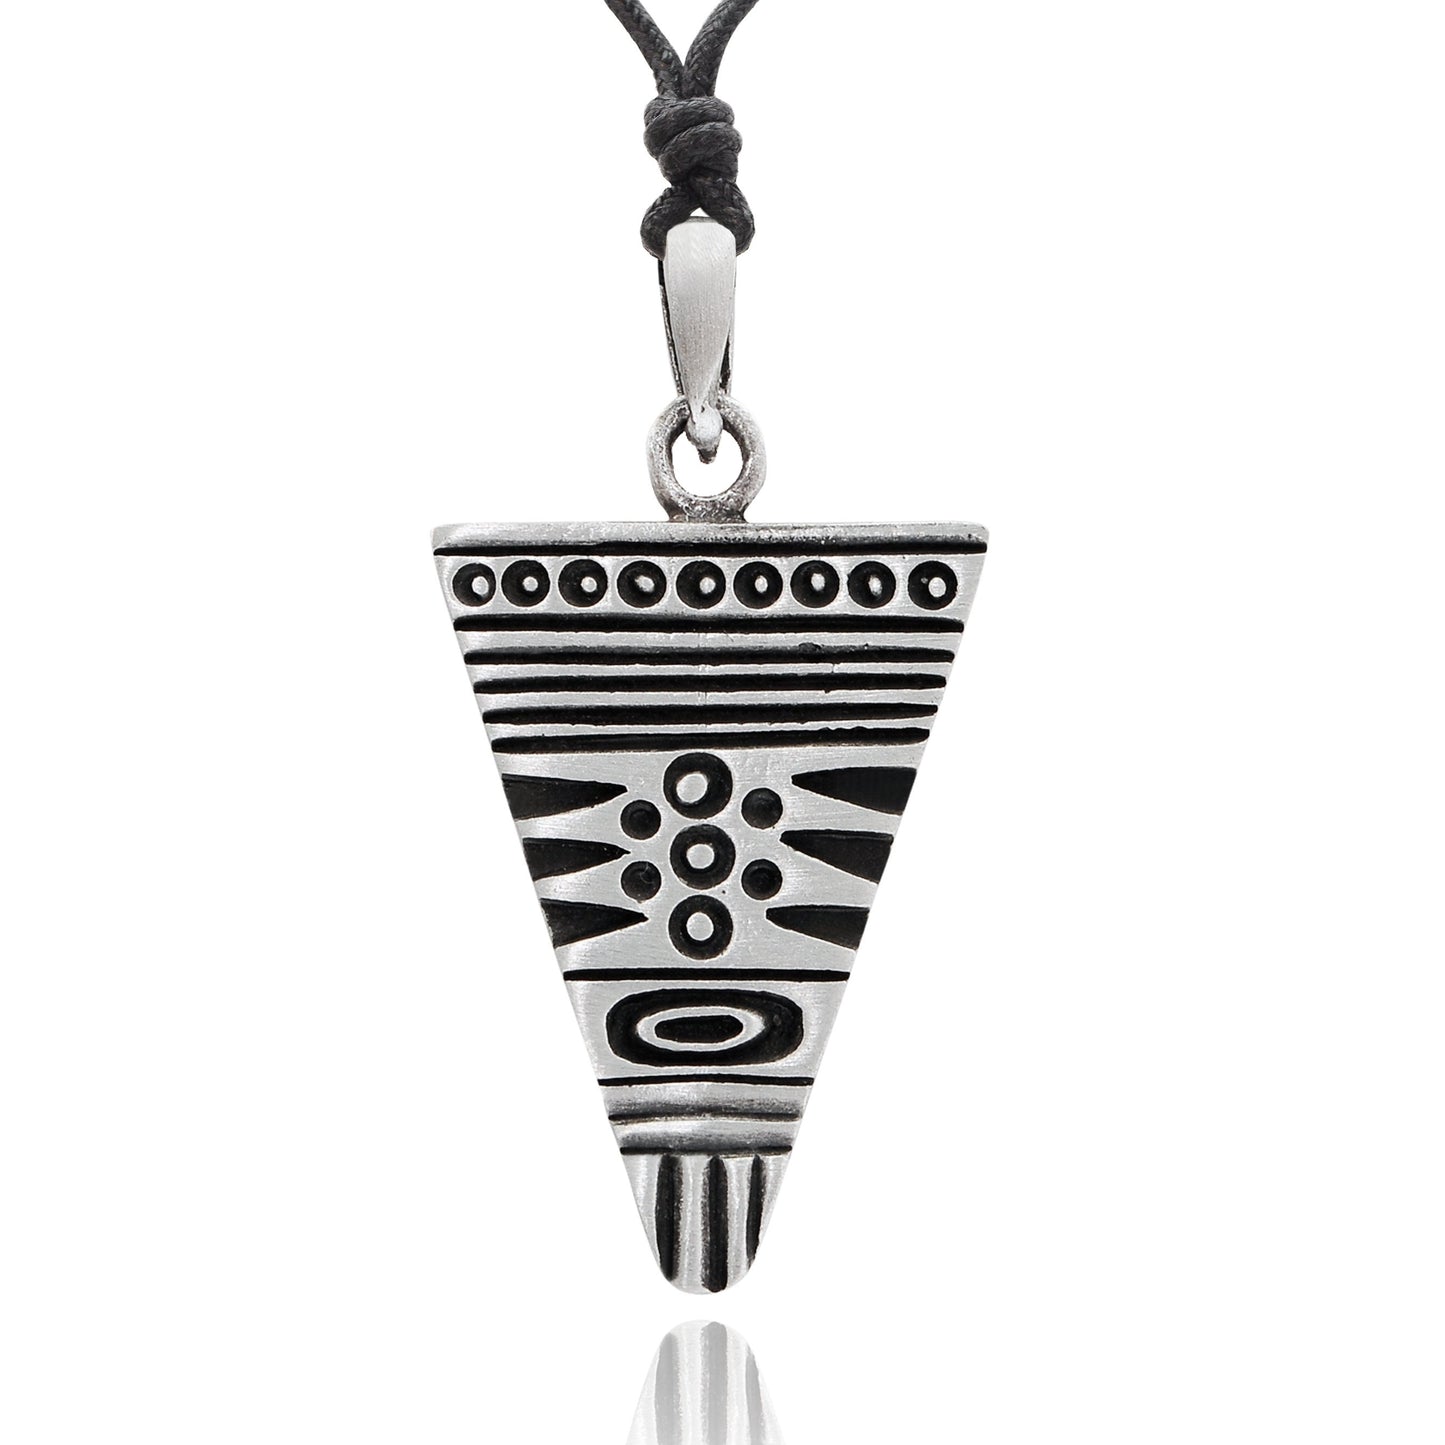 New Aztec Mayan Design Silver Pewter Gold Brass Charm Necklace Pendant Jewelry